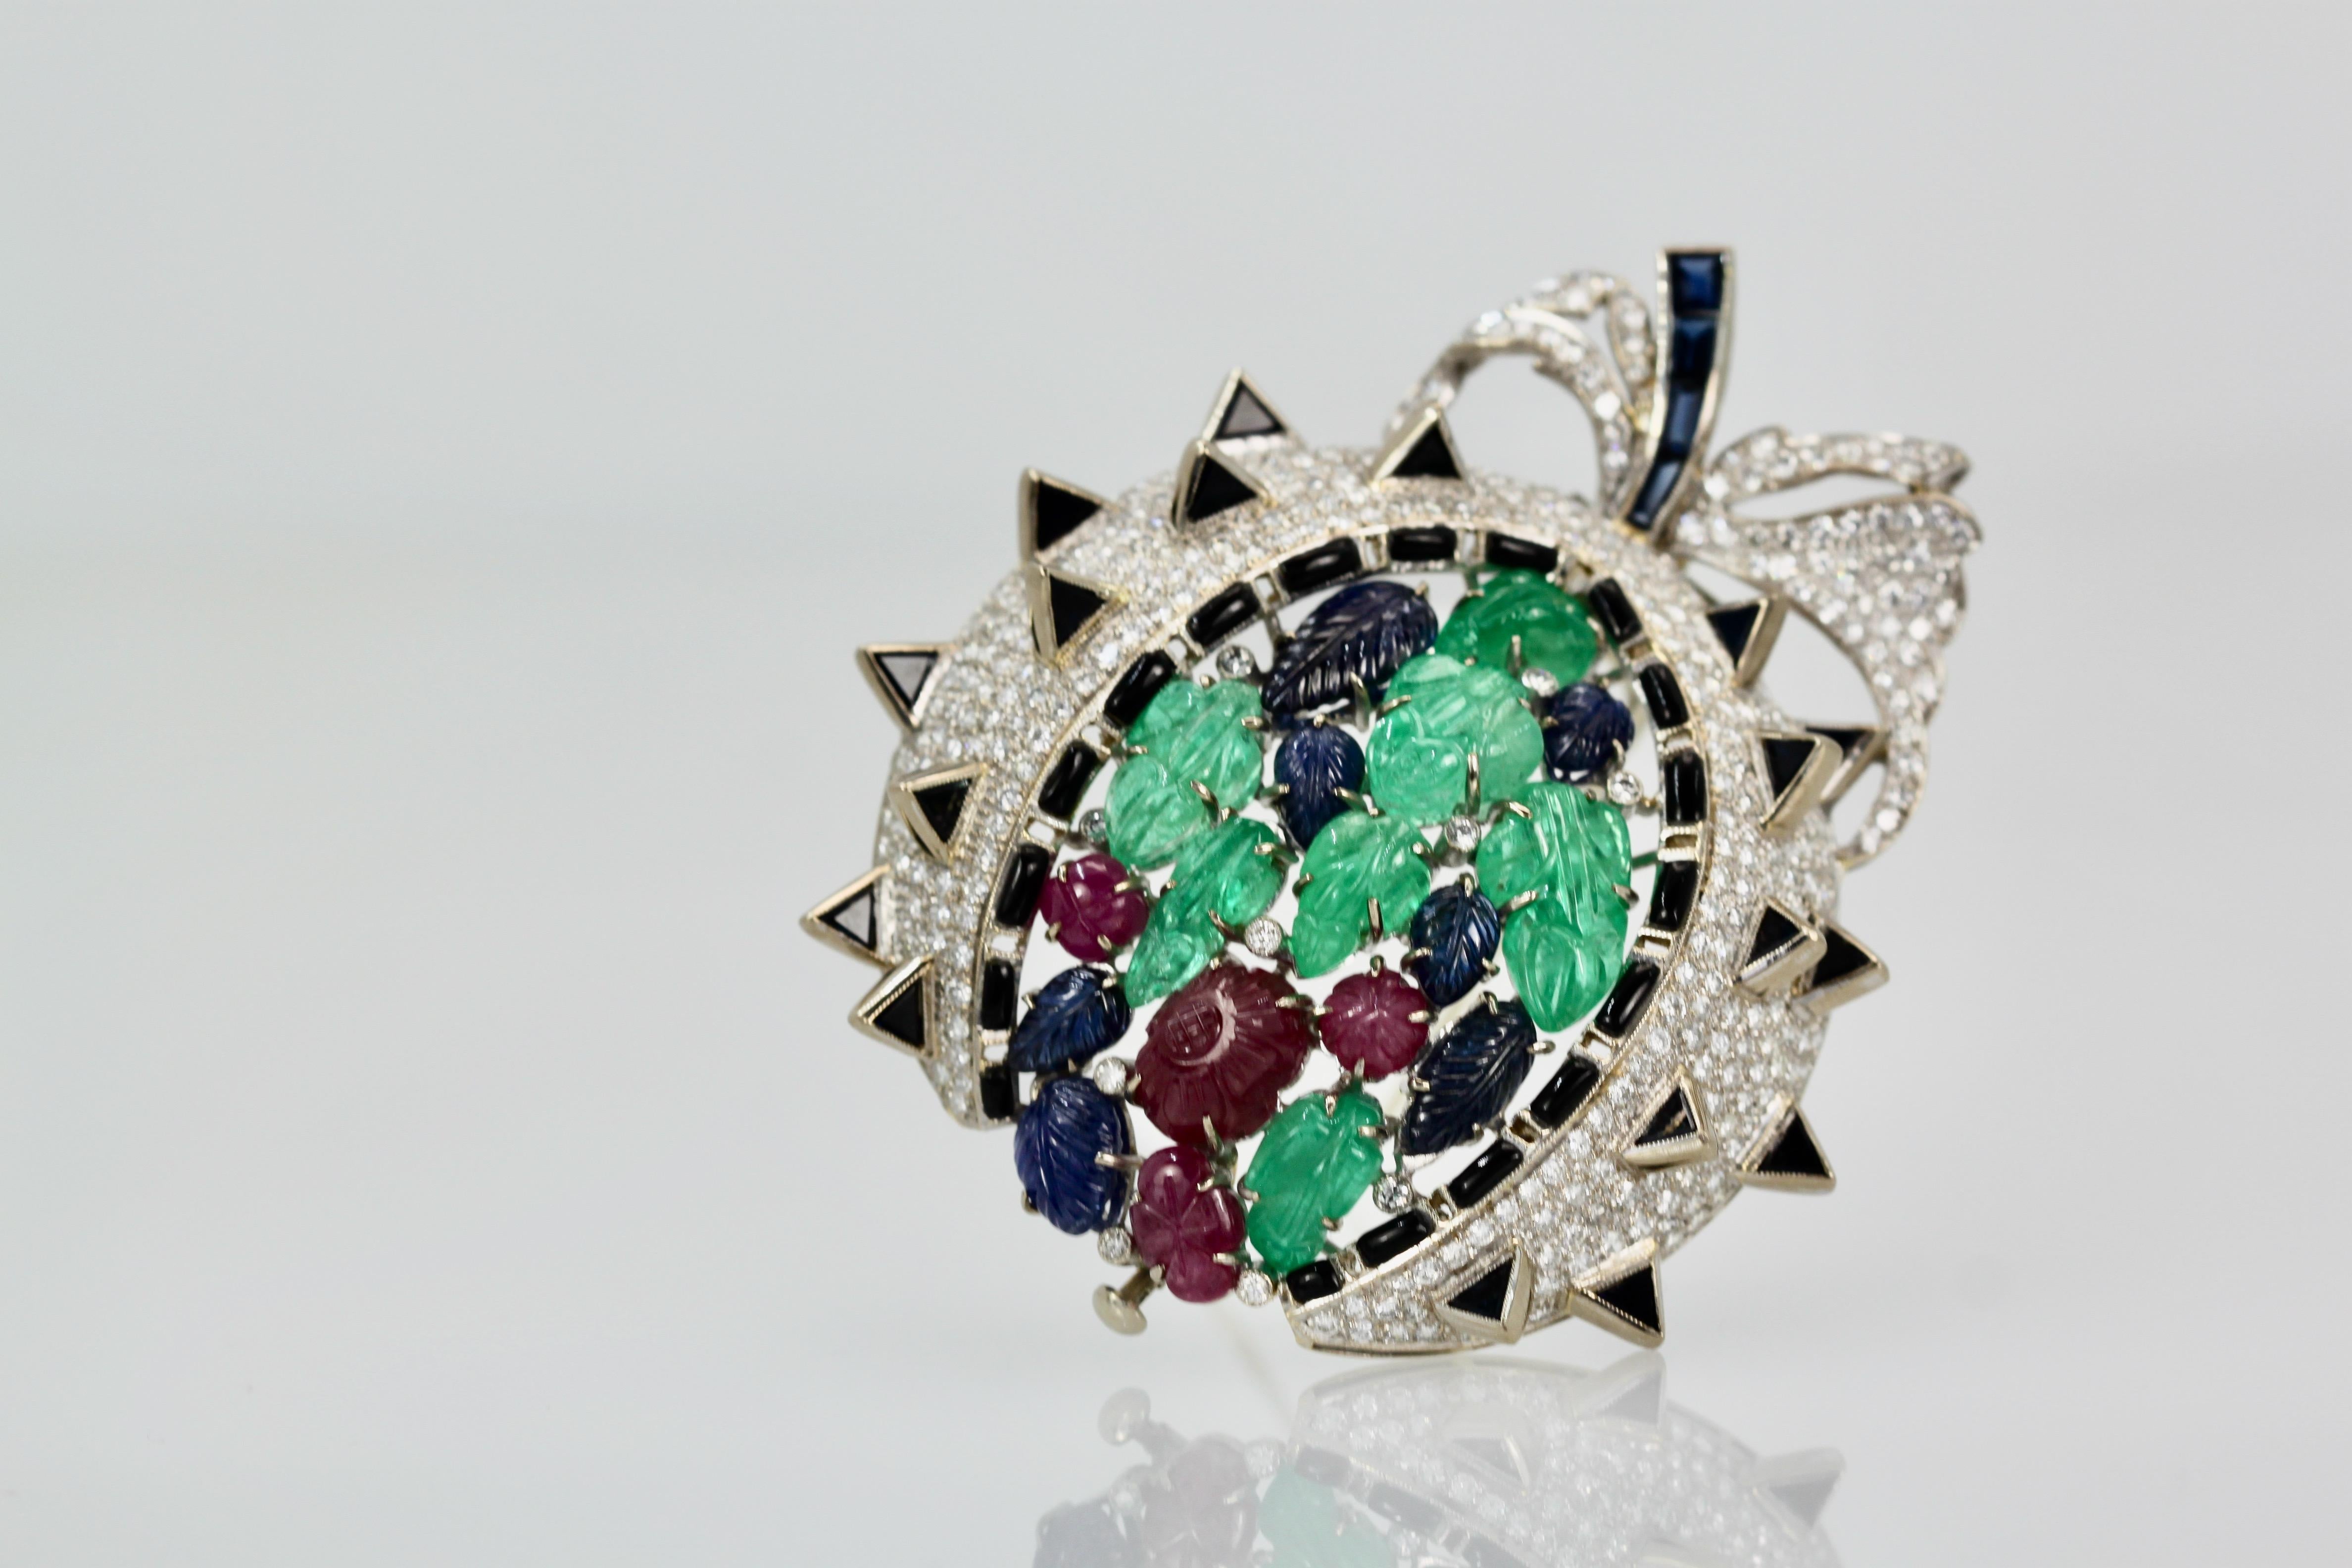 This gorgeous brooch is open like a melon and the seeds are all carved leaves and the Diamonds are the berries.  This brooch is large 6.0cm long by 5.5cm wide and weighs a whopping 48.5 grams.  There are 18 carved leaves, 7 Emeralds, 7 Sapphires, 4